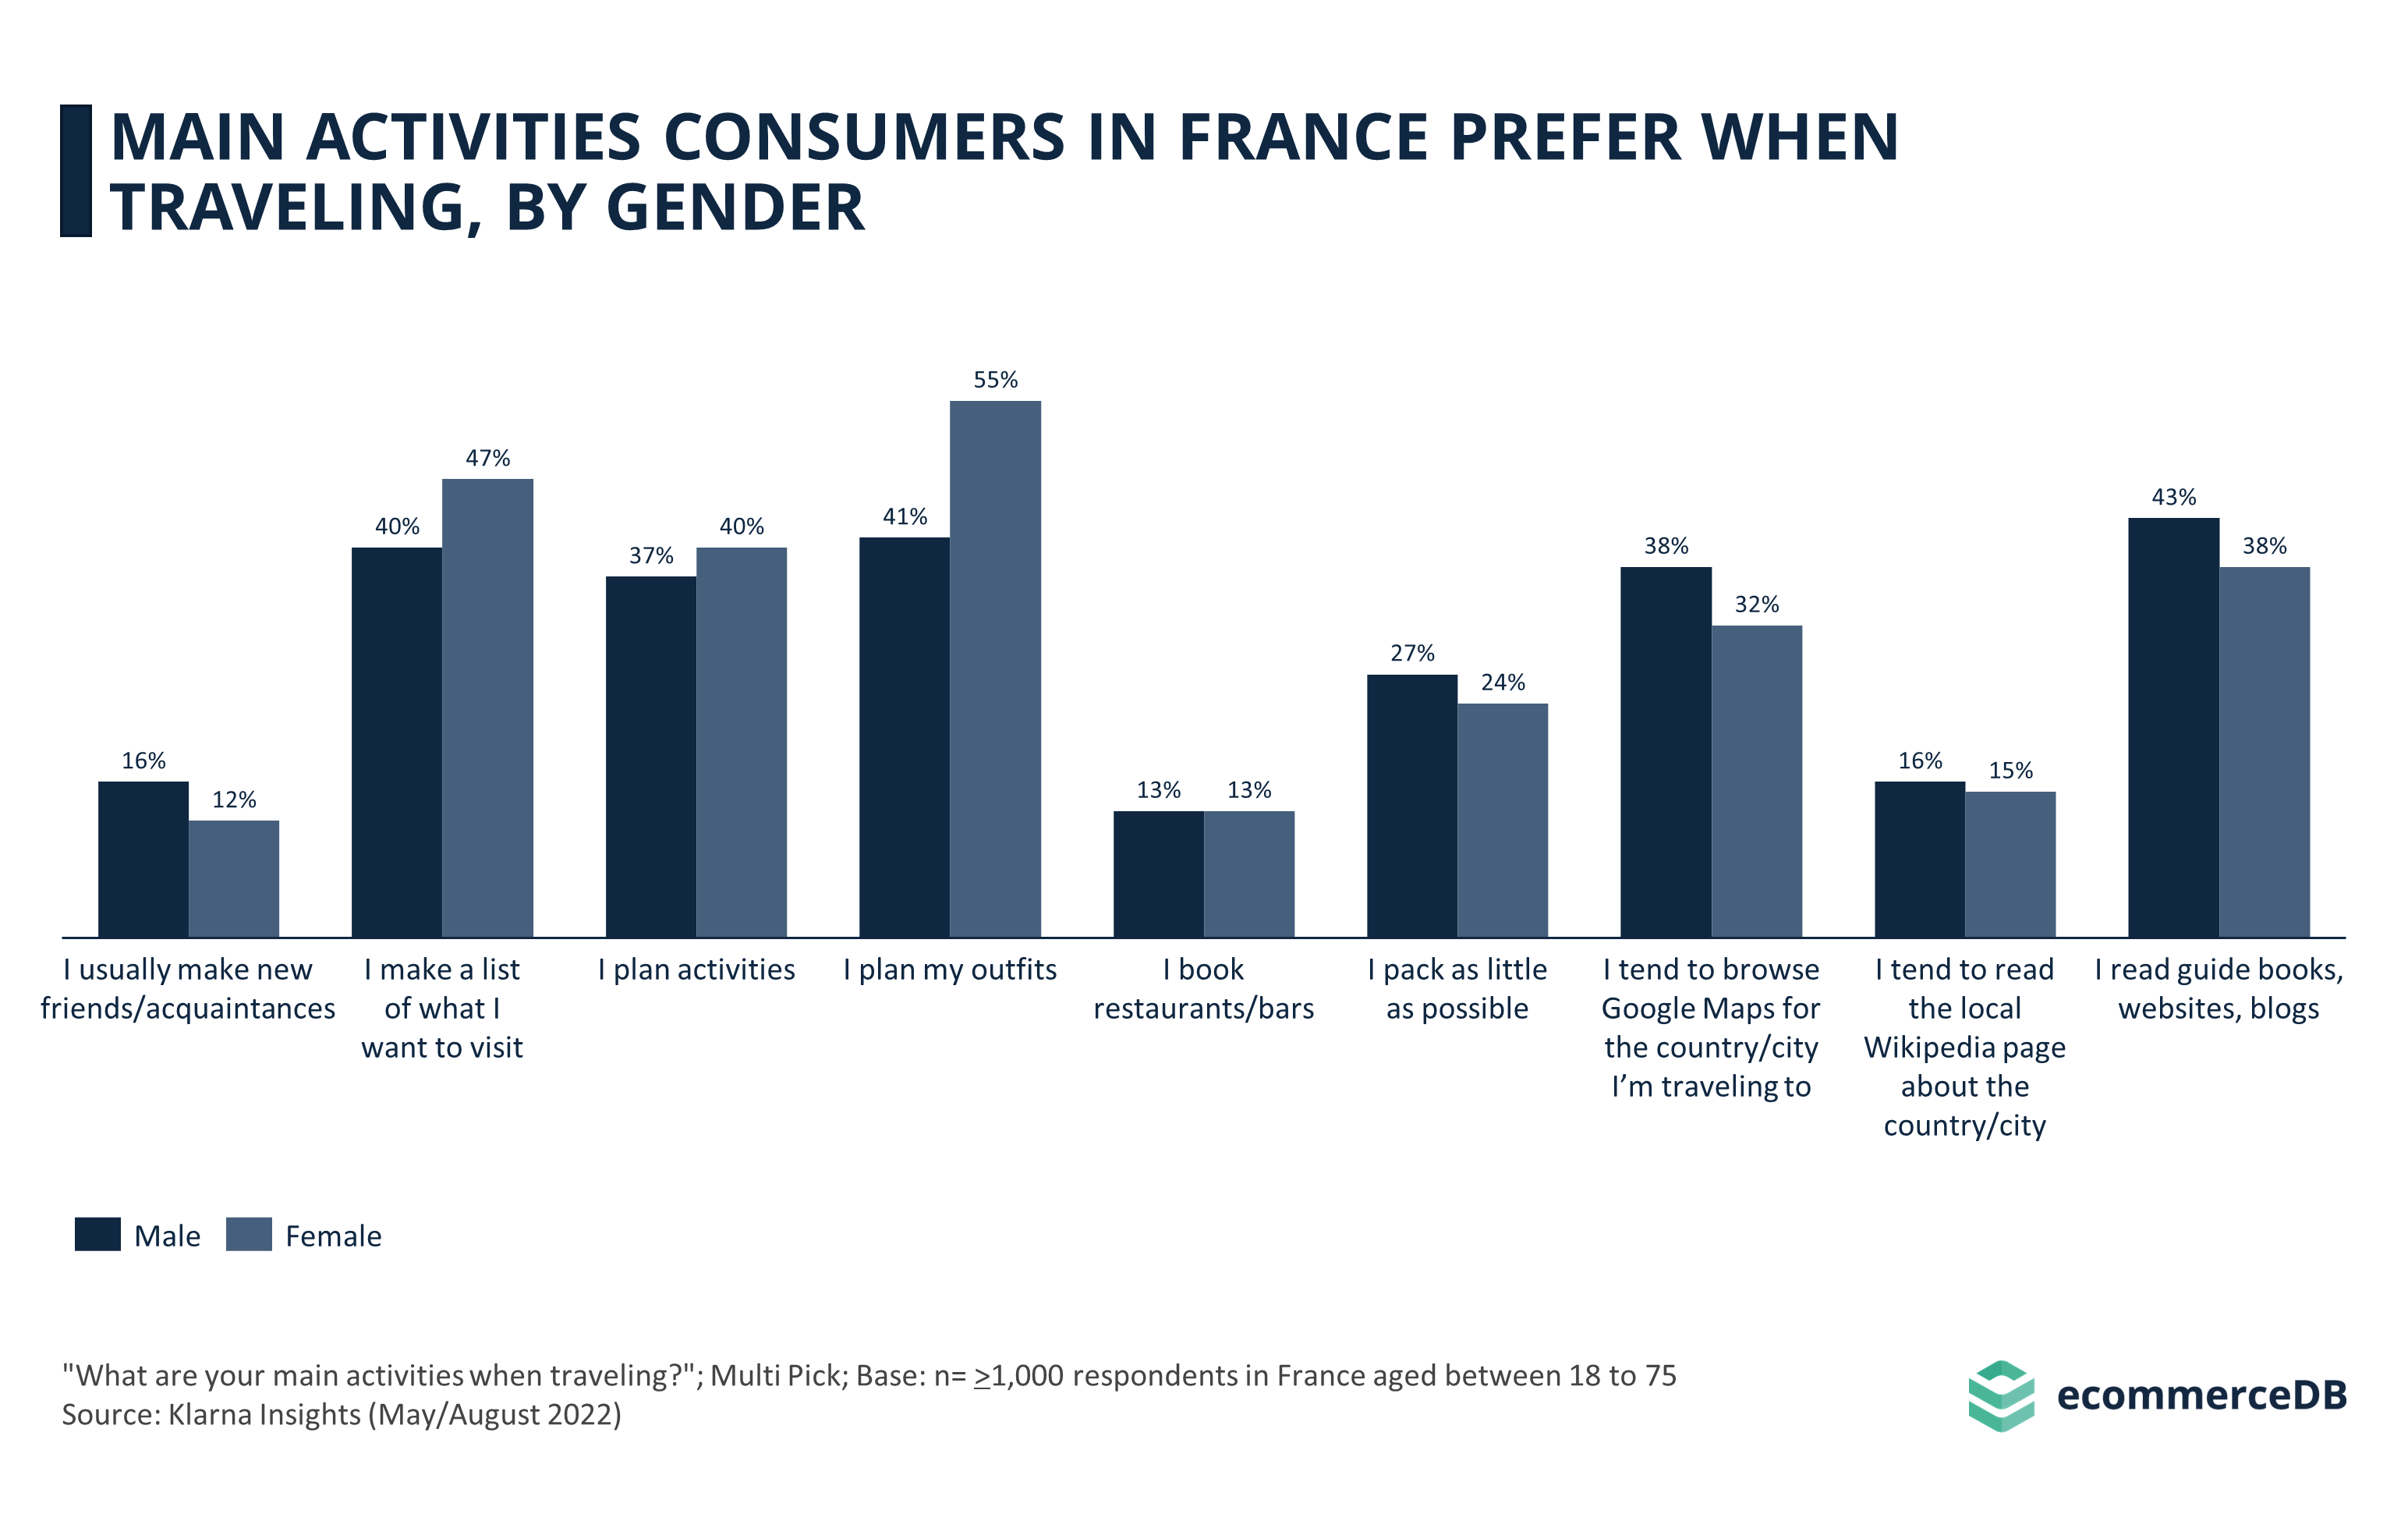 Main Activities When Traveling of Consumers in France by Gender